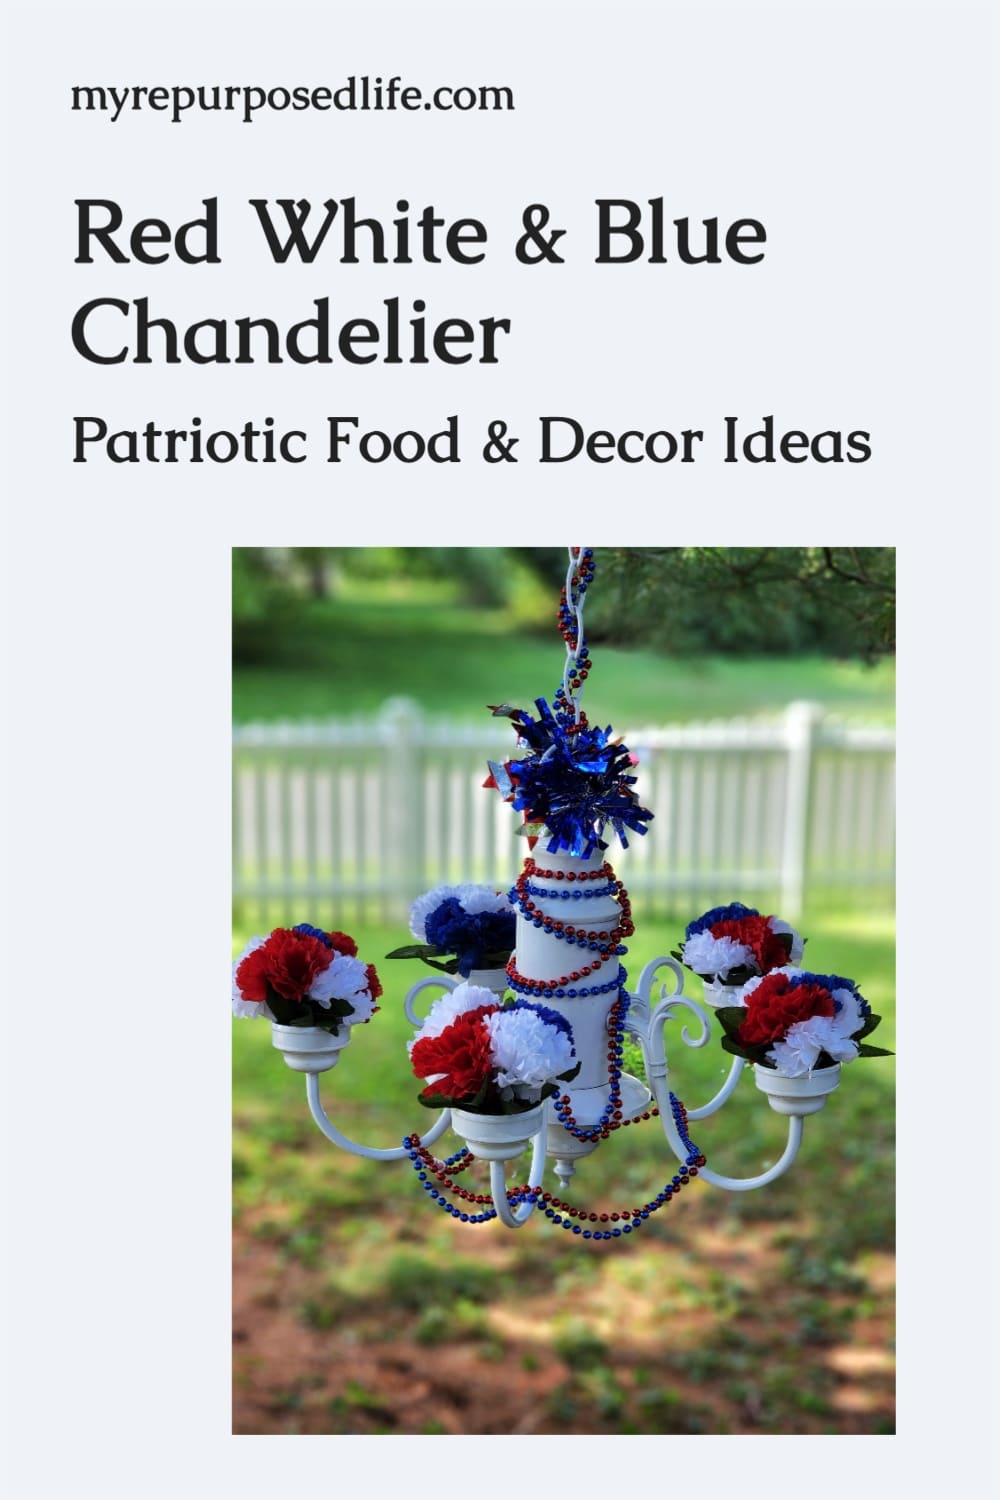 A red white and blue chandelier project highlights a collection of patriotic decor. These DIY projects are a fun addition to your party! #MyRepurposedLife #upcycled #chandelier #redwhiteblue #patriotic #usa via @repurposedlife